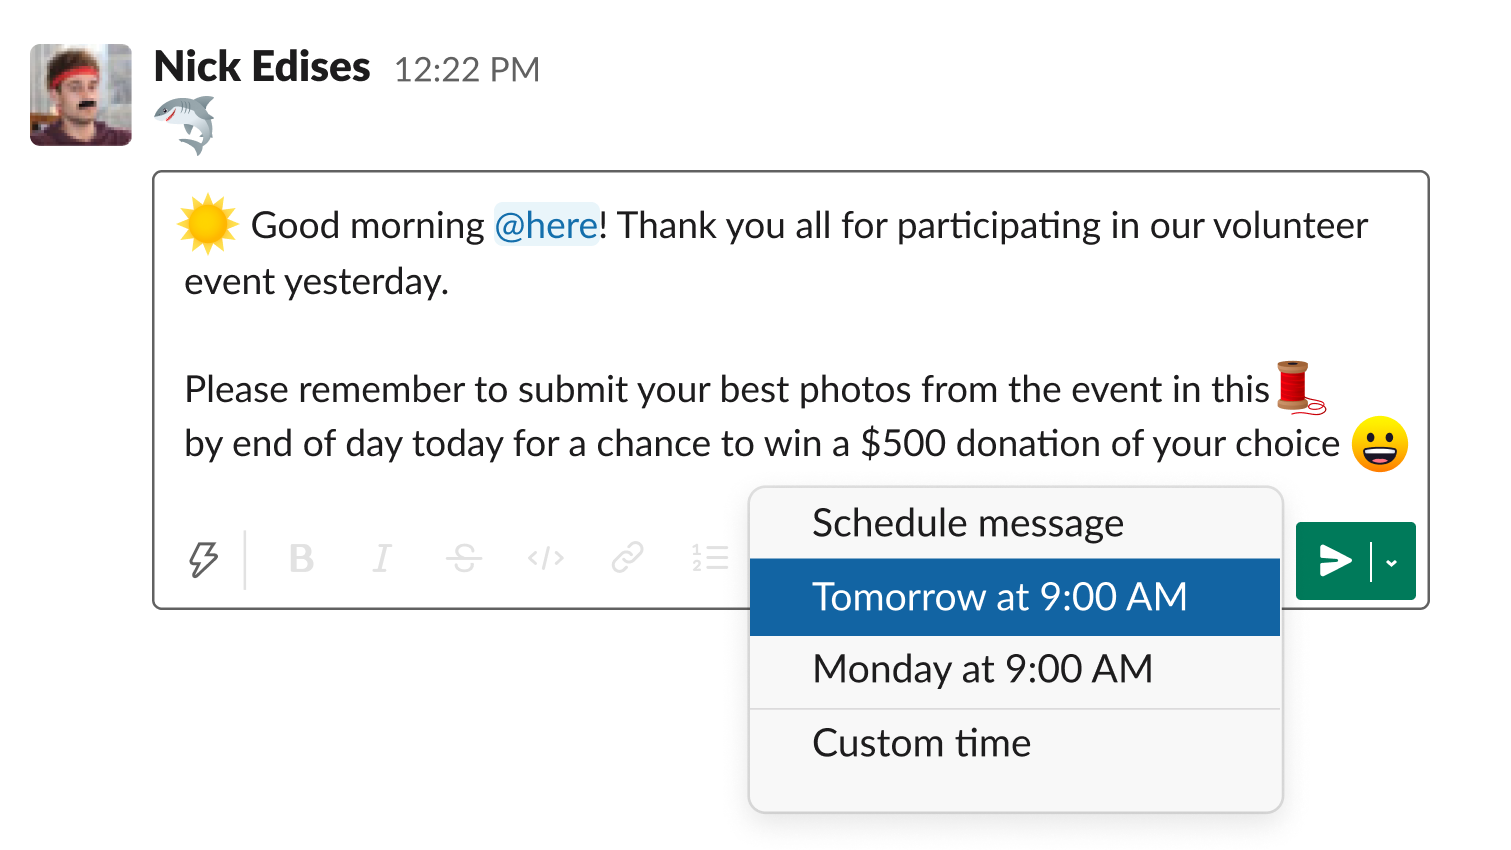 Slack's built-in schedule message feature allows messages to be sent at the optimal date and time in the future.